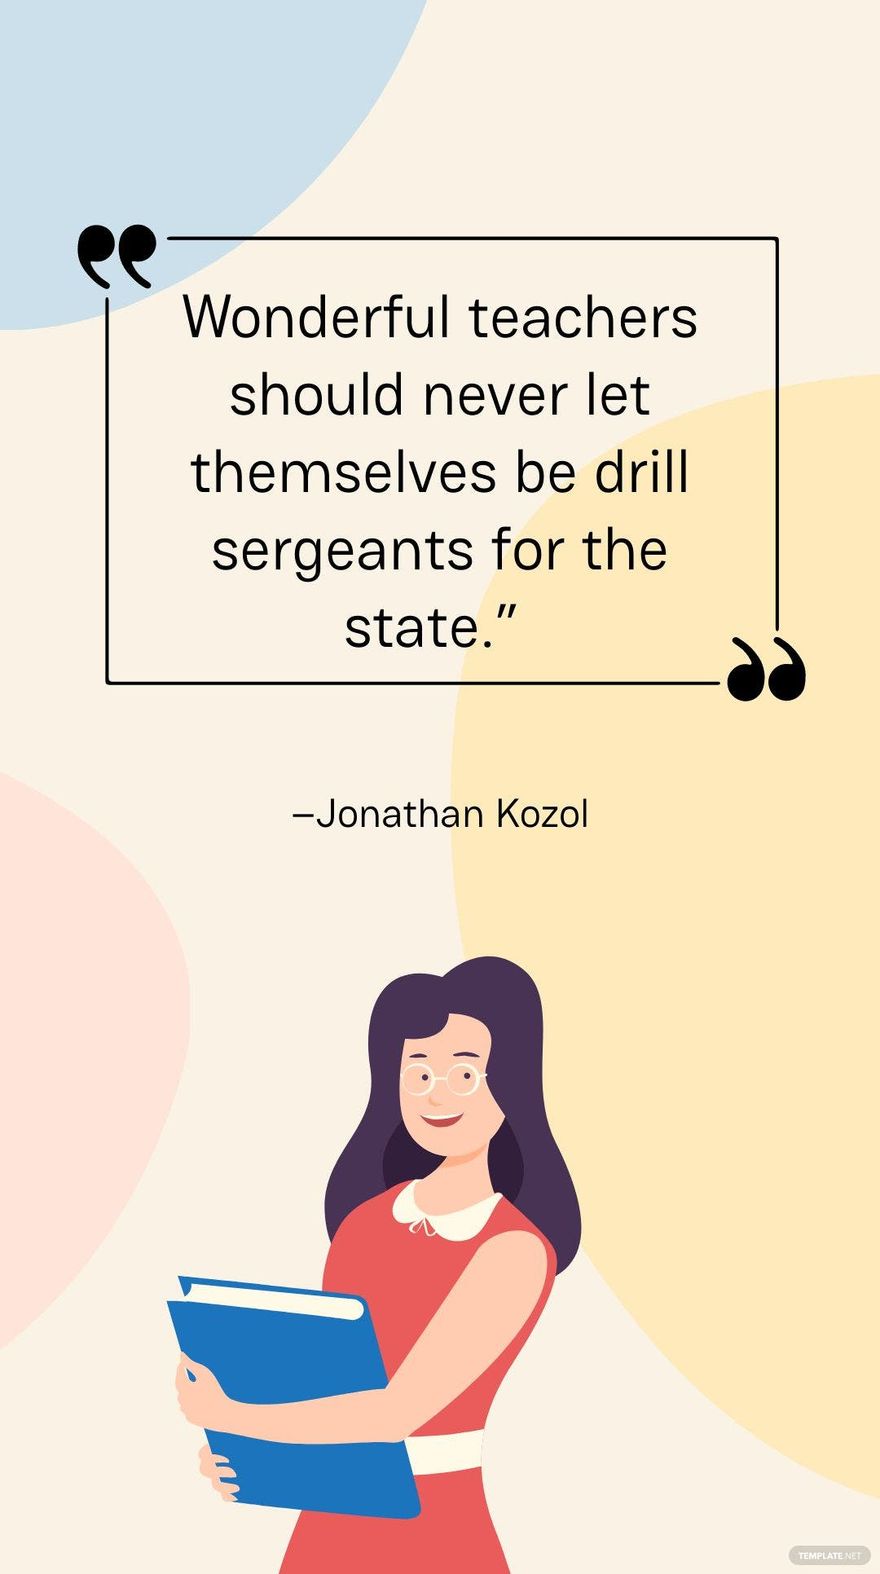 Free Jonathan Kozol - Wonderful teachers should never let themselves be drill sergeants for the state. in JPG